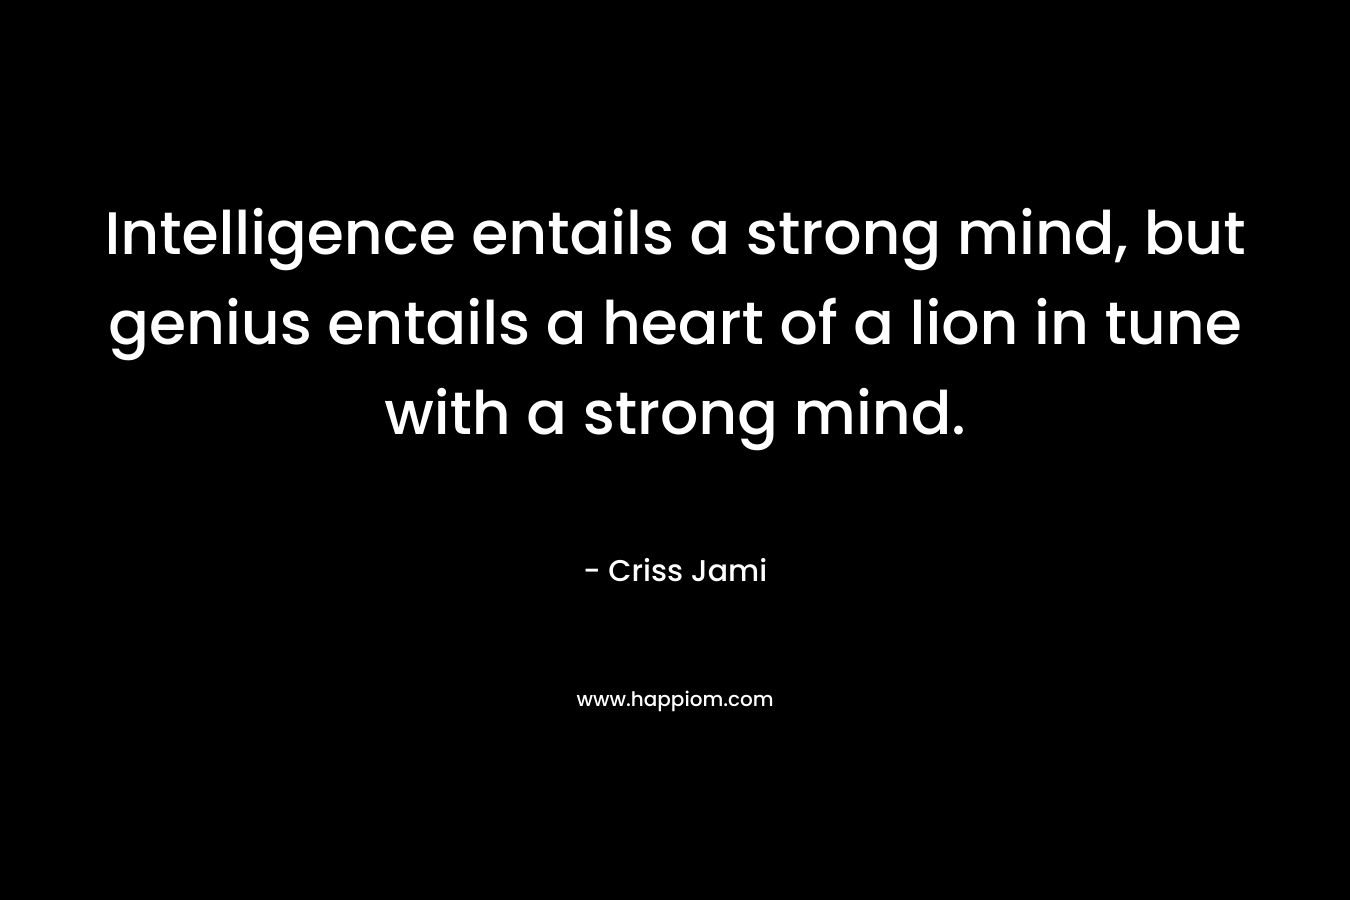 Intelligence entails a strong mind, but genius entails a heart of a lion in tune with a strong mind. – Criss Jami